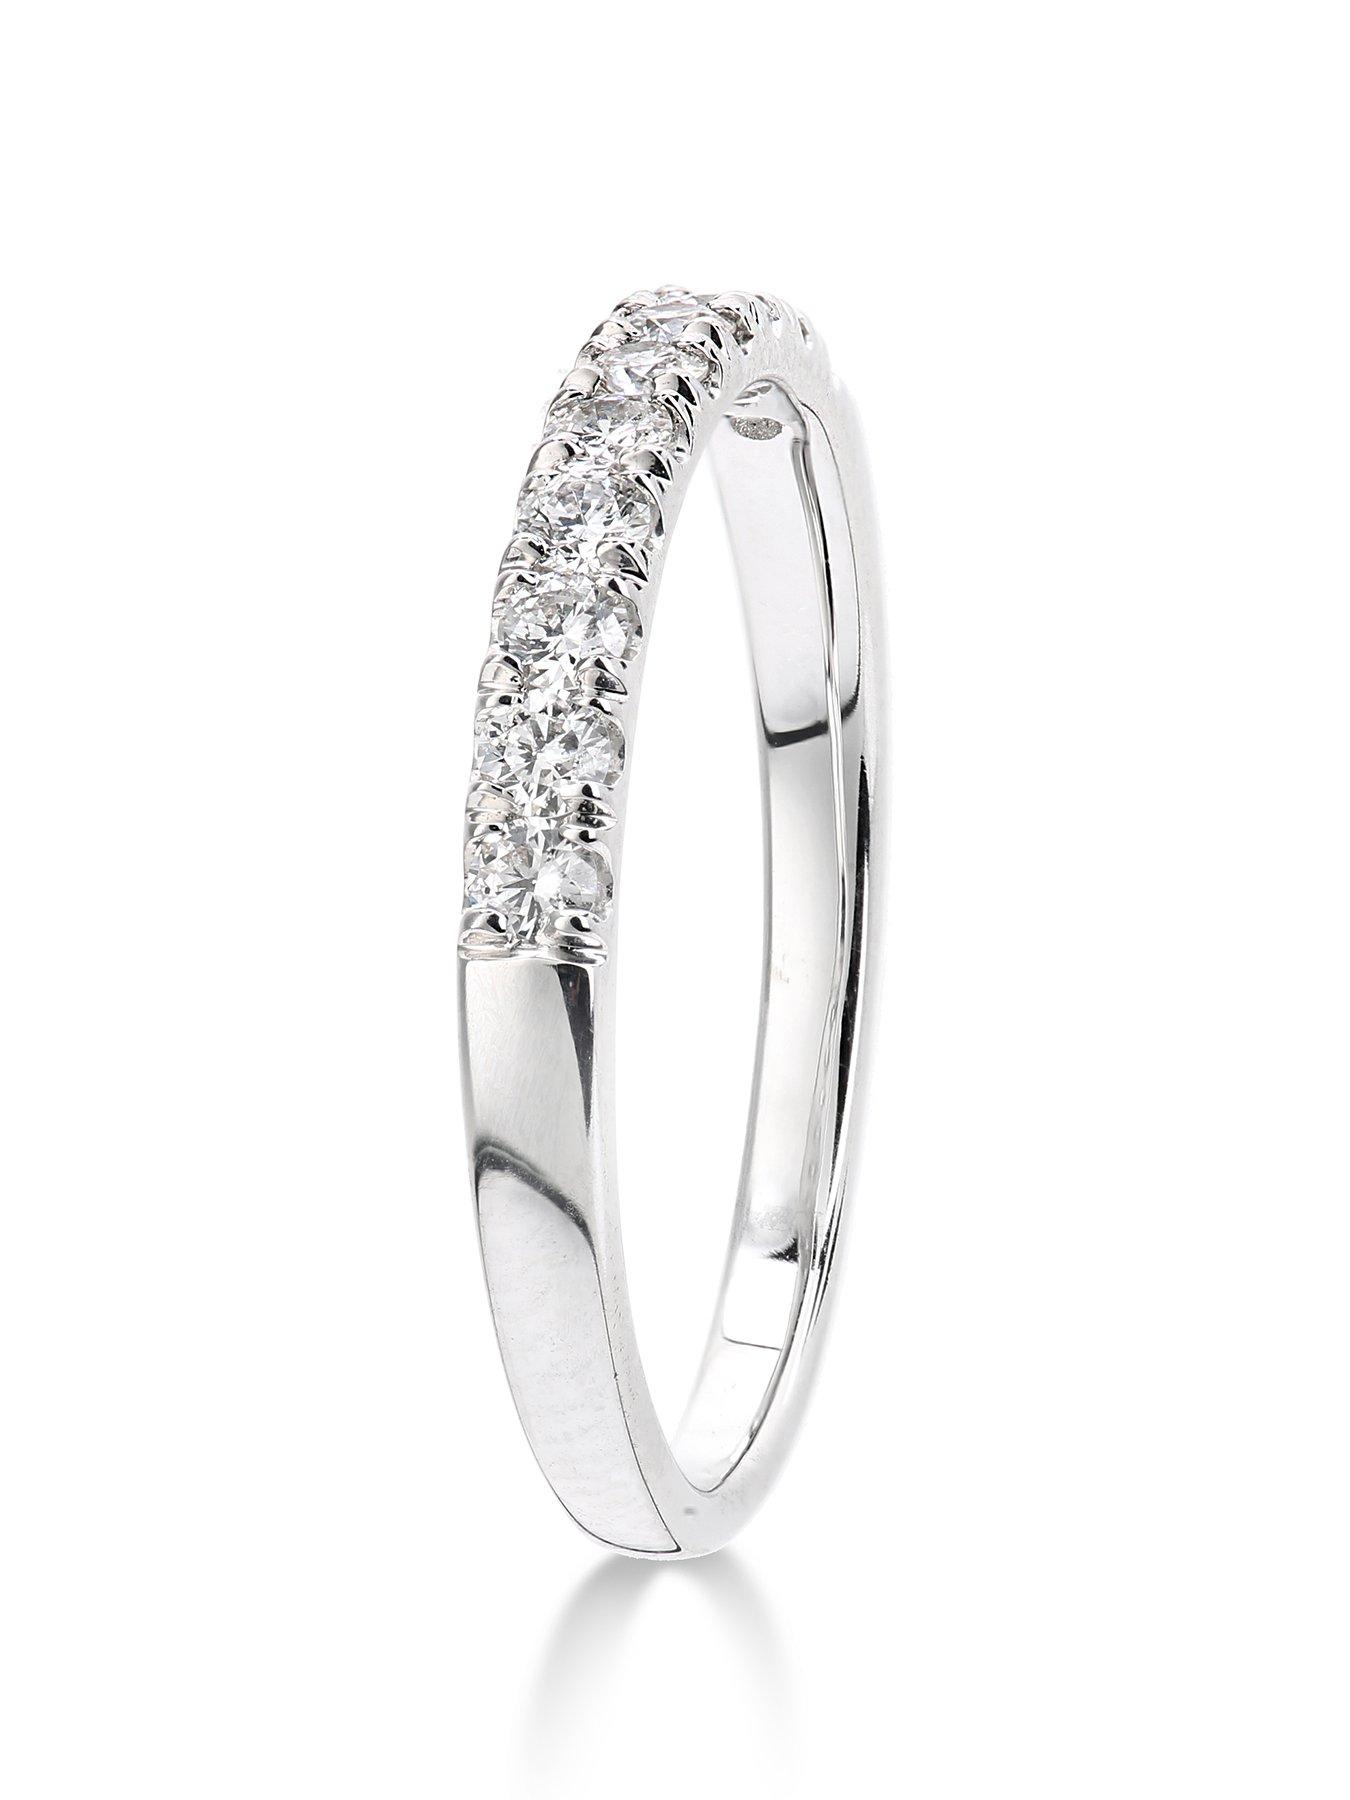  9ct white gold 33 point micro setting eternity ring